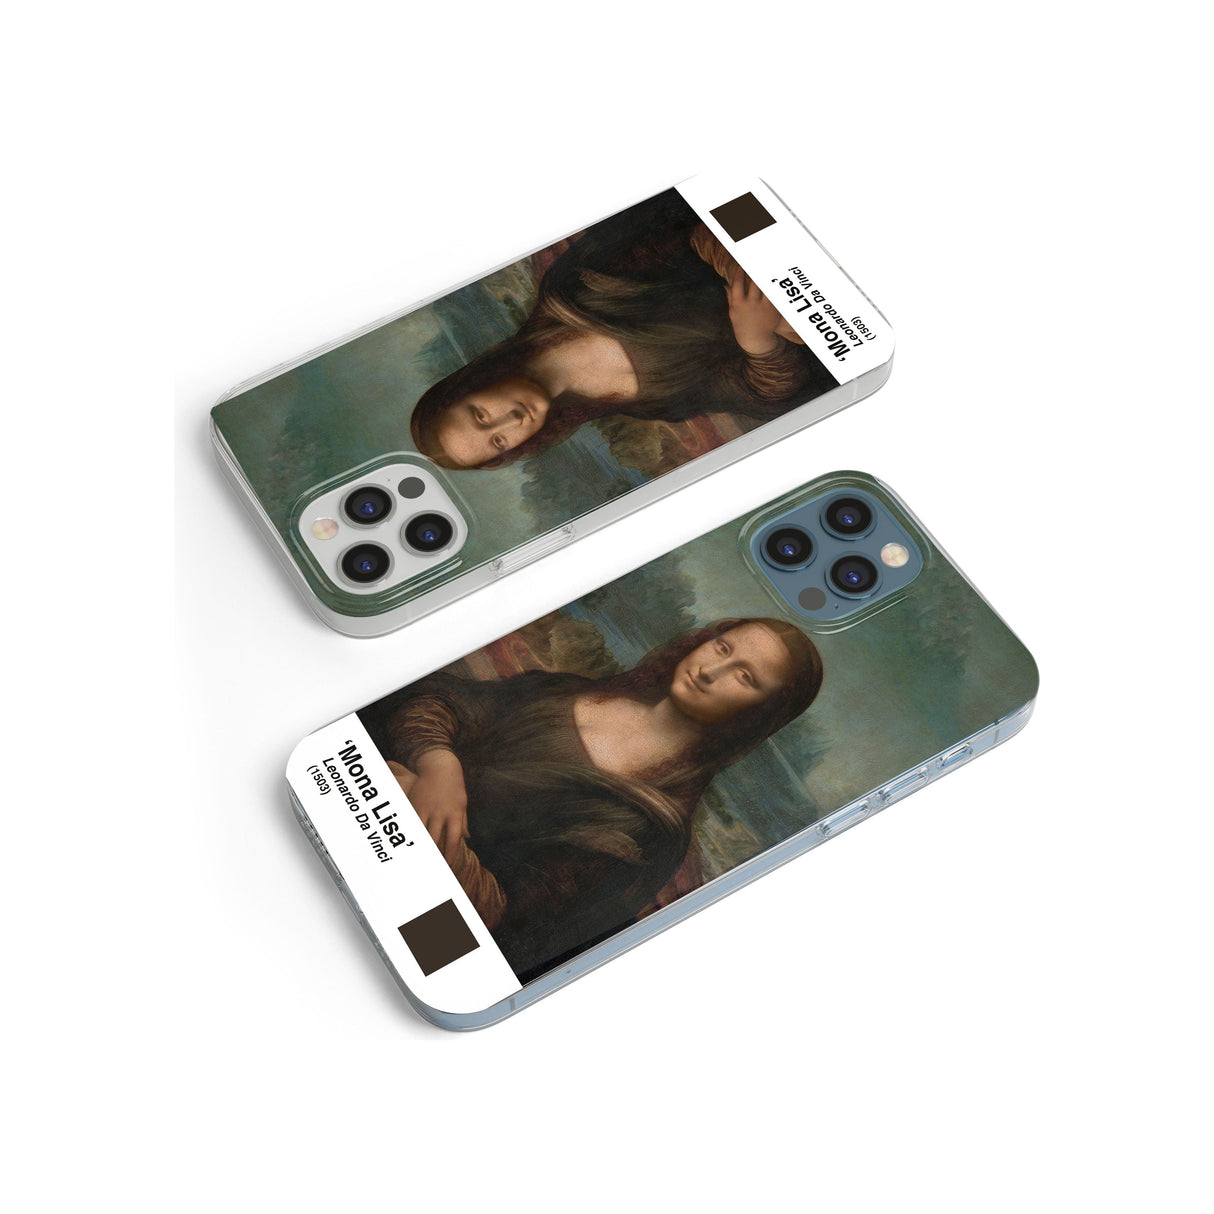 The Birth of Venus Phone Case for iPhone 12 Pro